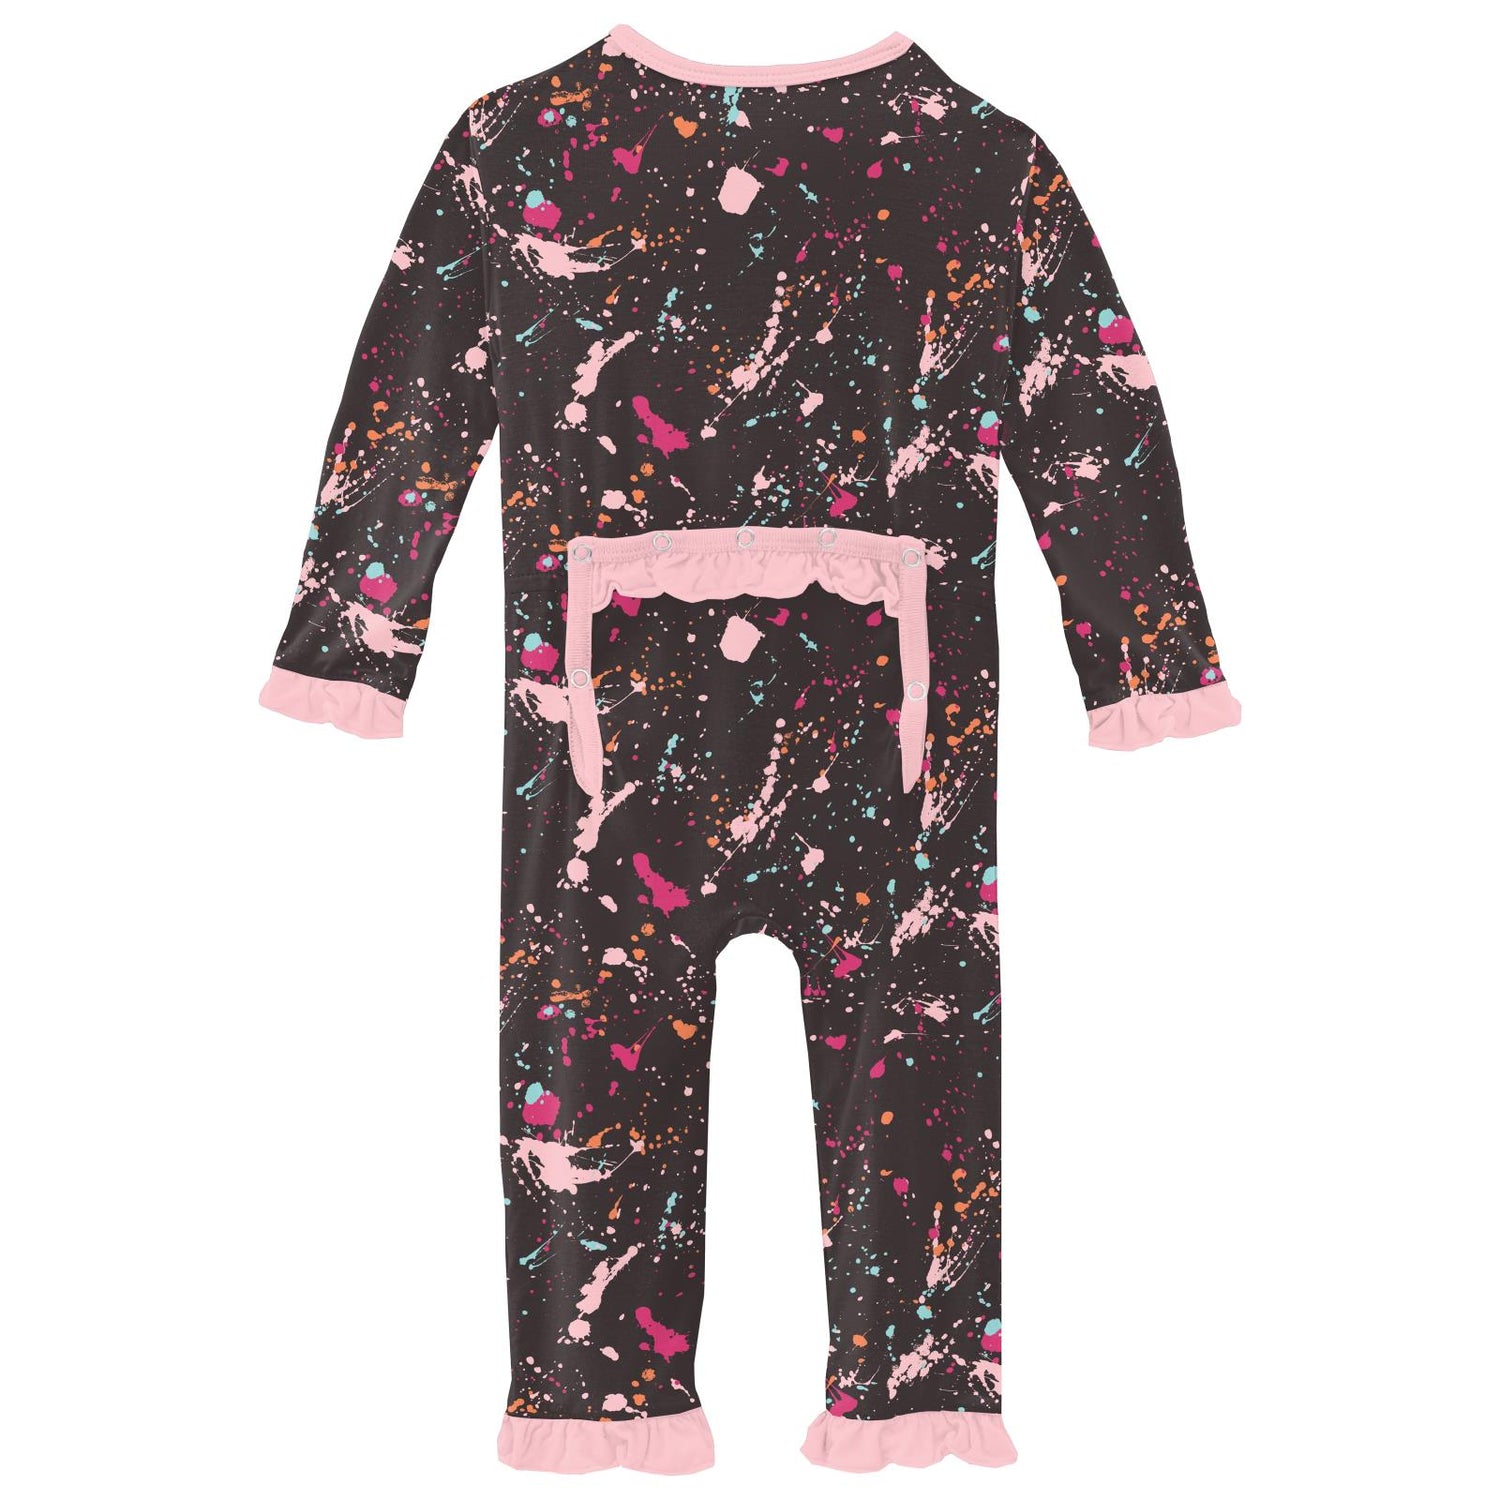 Print Classic Ruffle Coverall with 2 Way Zipper in Calypso Splatter Paint